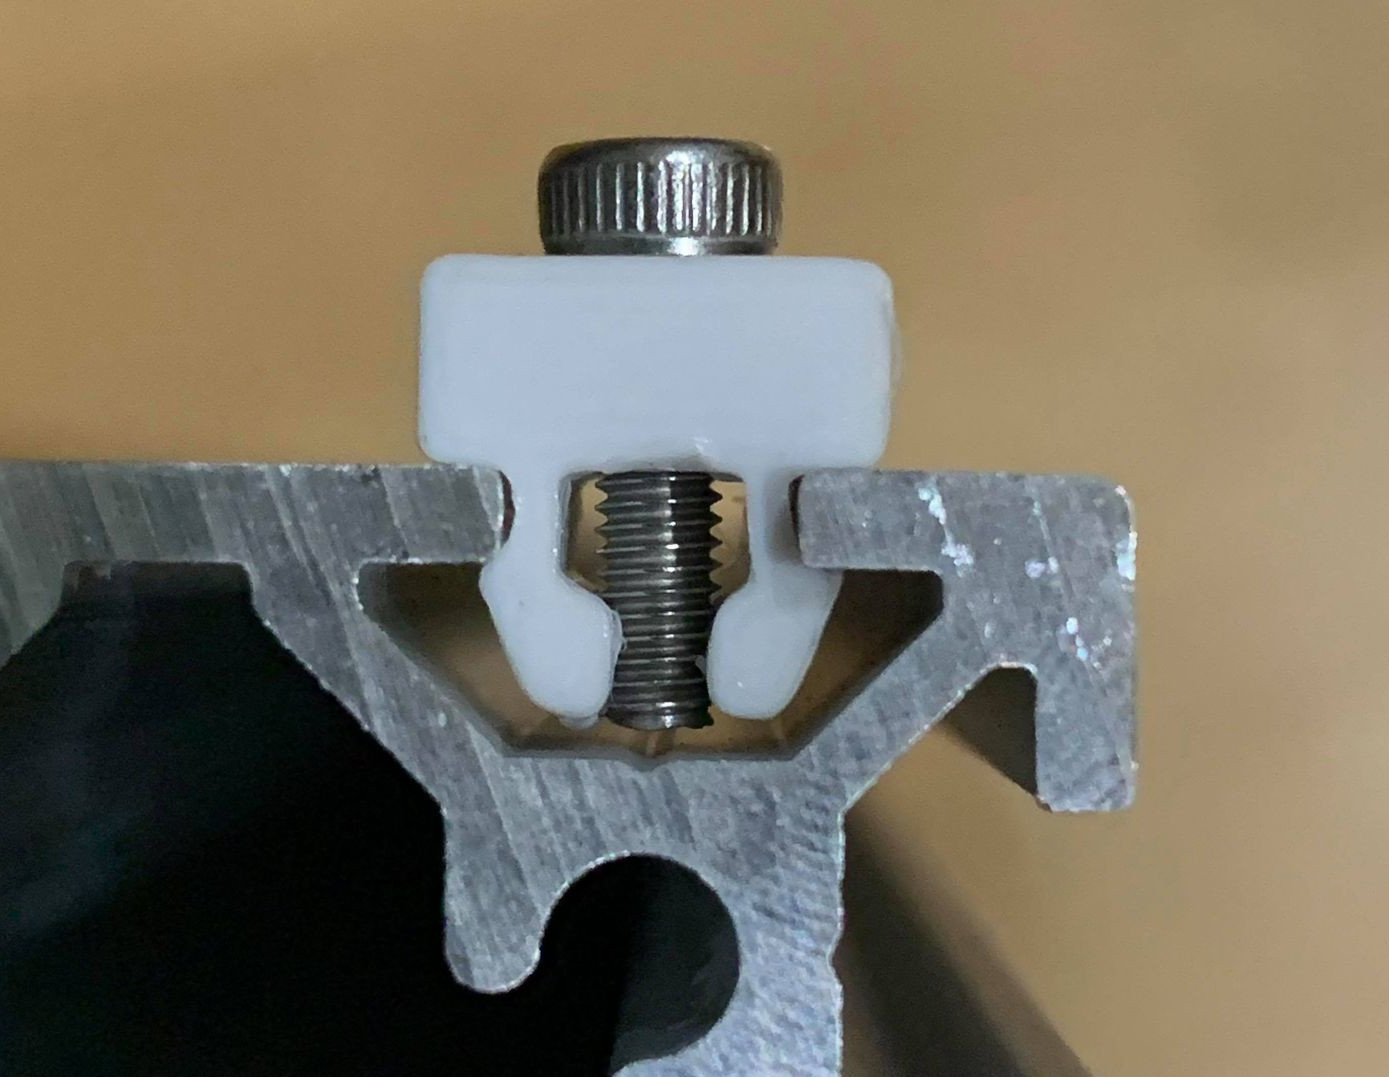 An example of my drop-in flexure nut design